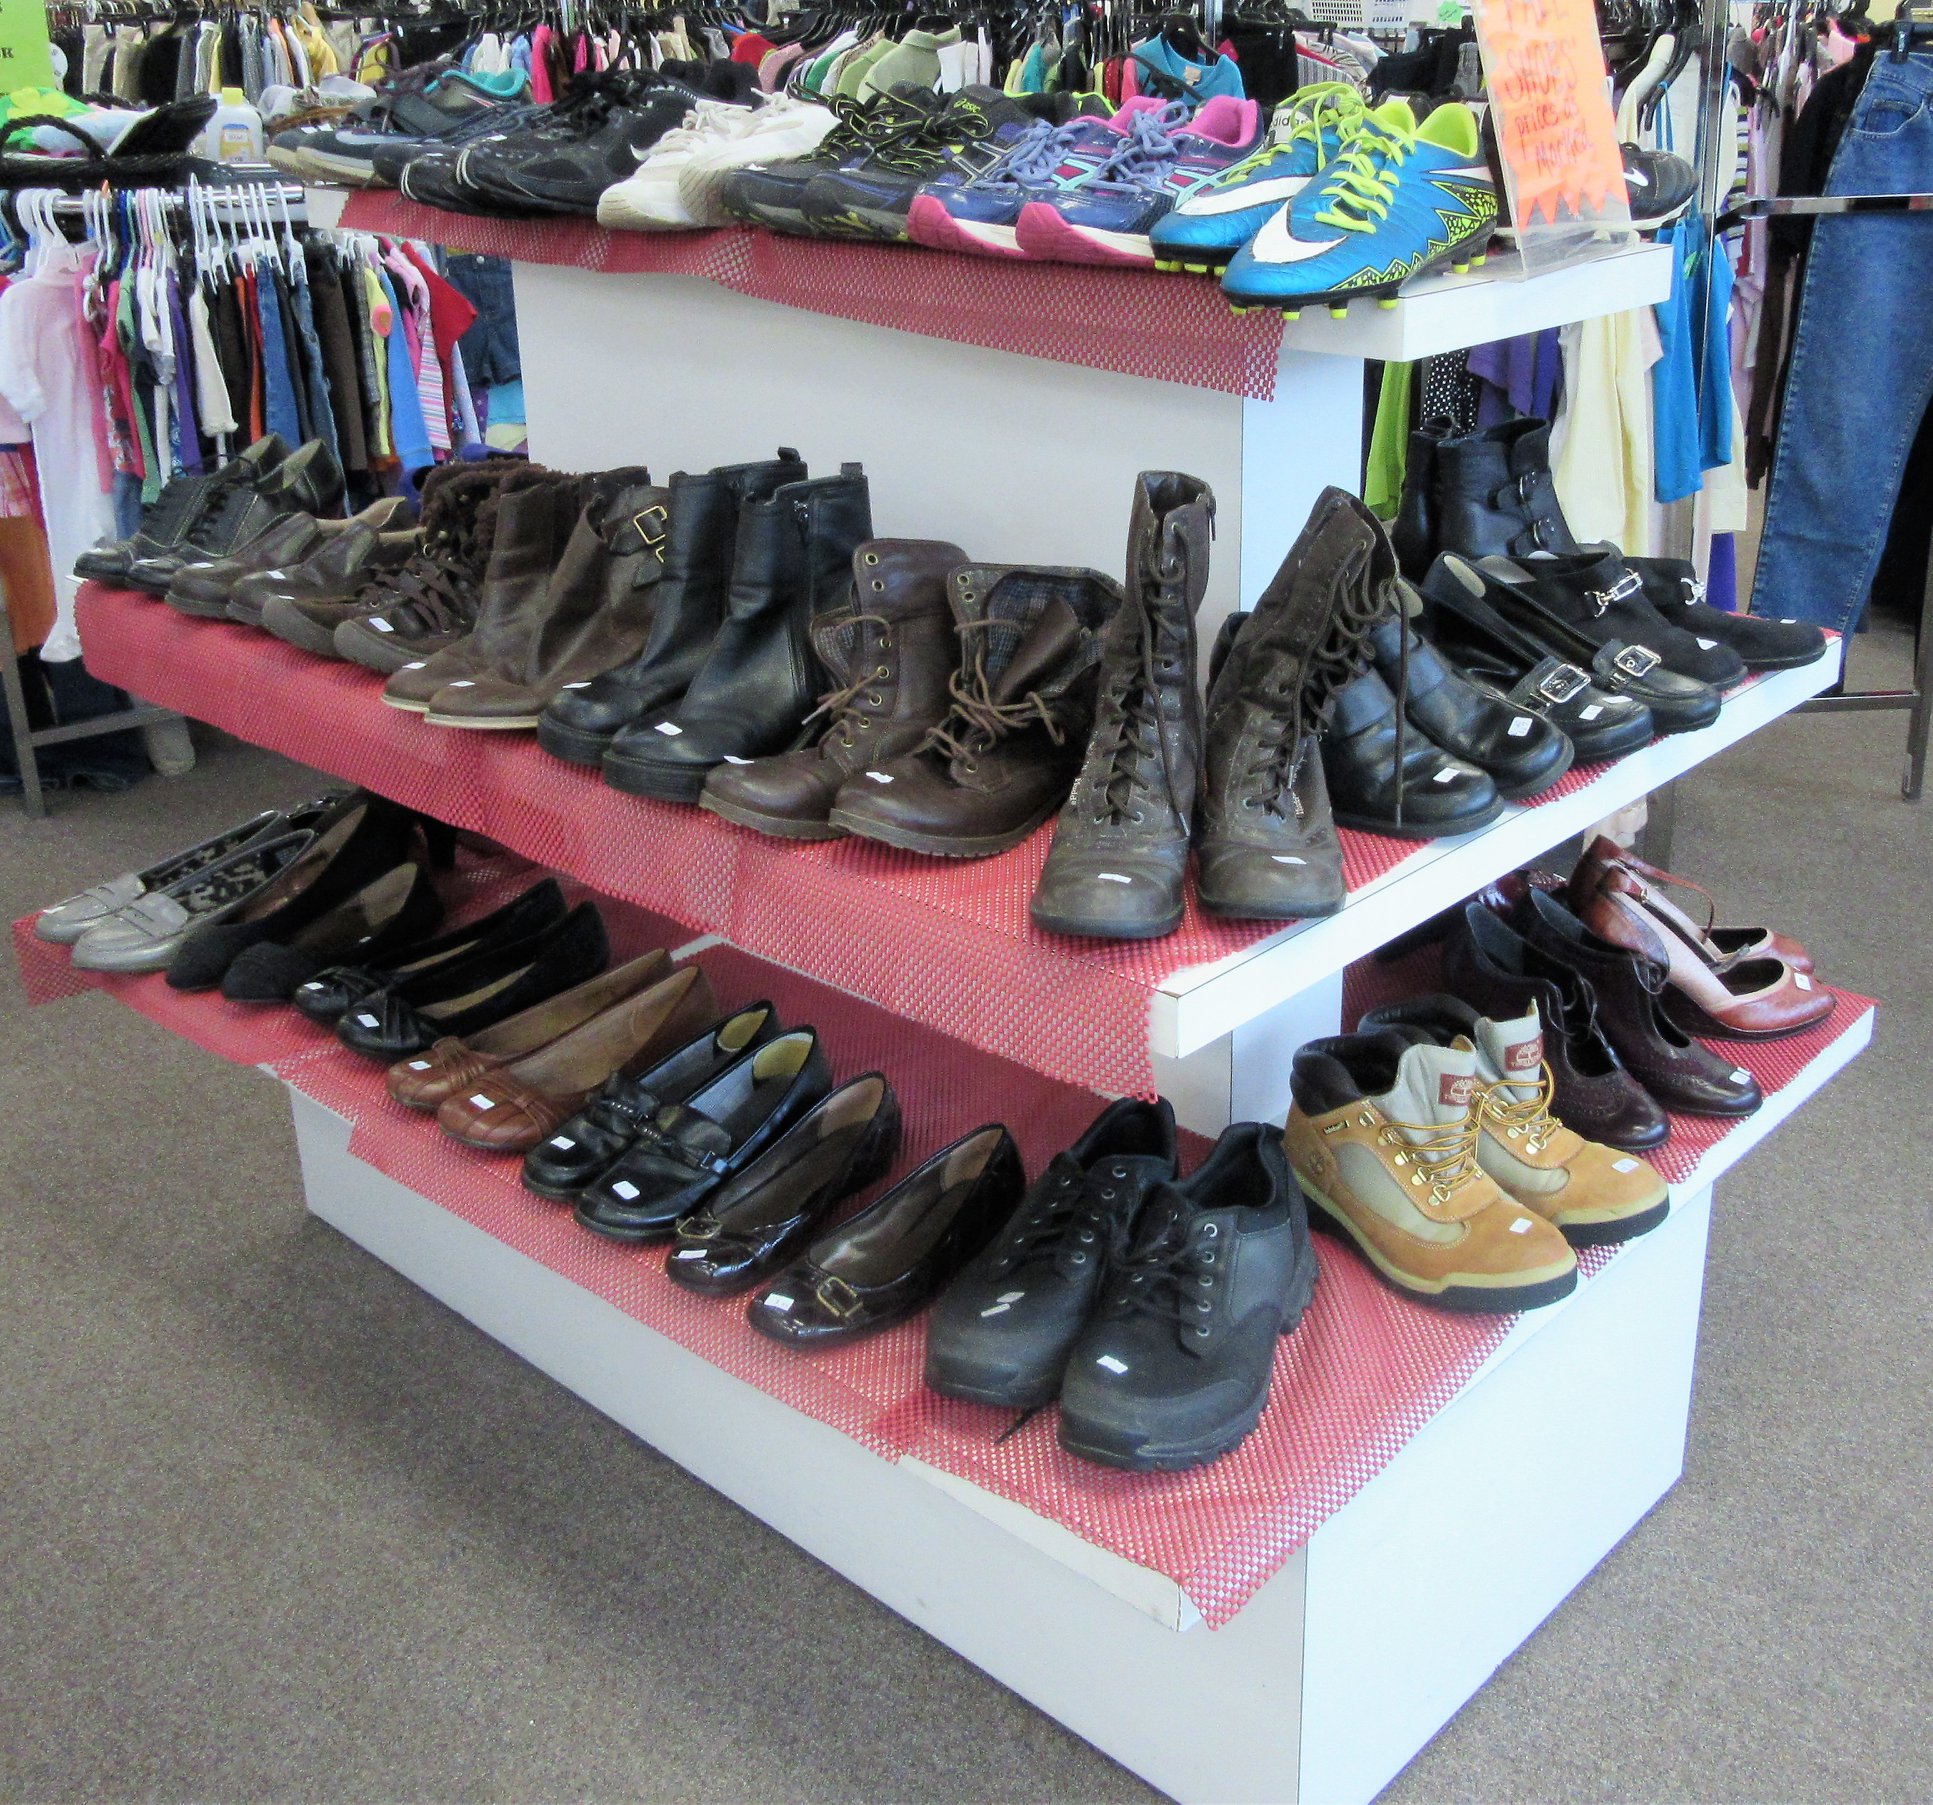 Organize, Elevate, and Celebrate Your Shoes  Closet Classics -  Southeastern Pennsylvania including Chadds Ford, Kennett Square,  Unionville, West Chester, Exton, Chester Springs, Glenmoore, Malvern, Paoli  , Philadelphia suburbs. Also Northern Delaware (